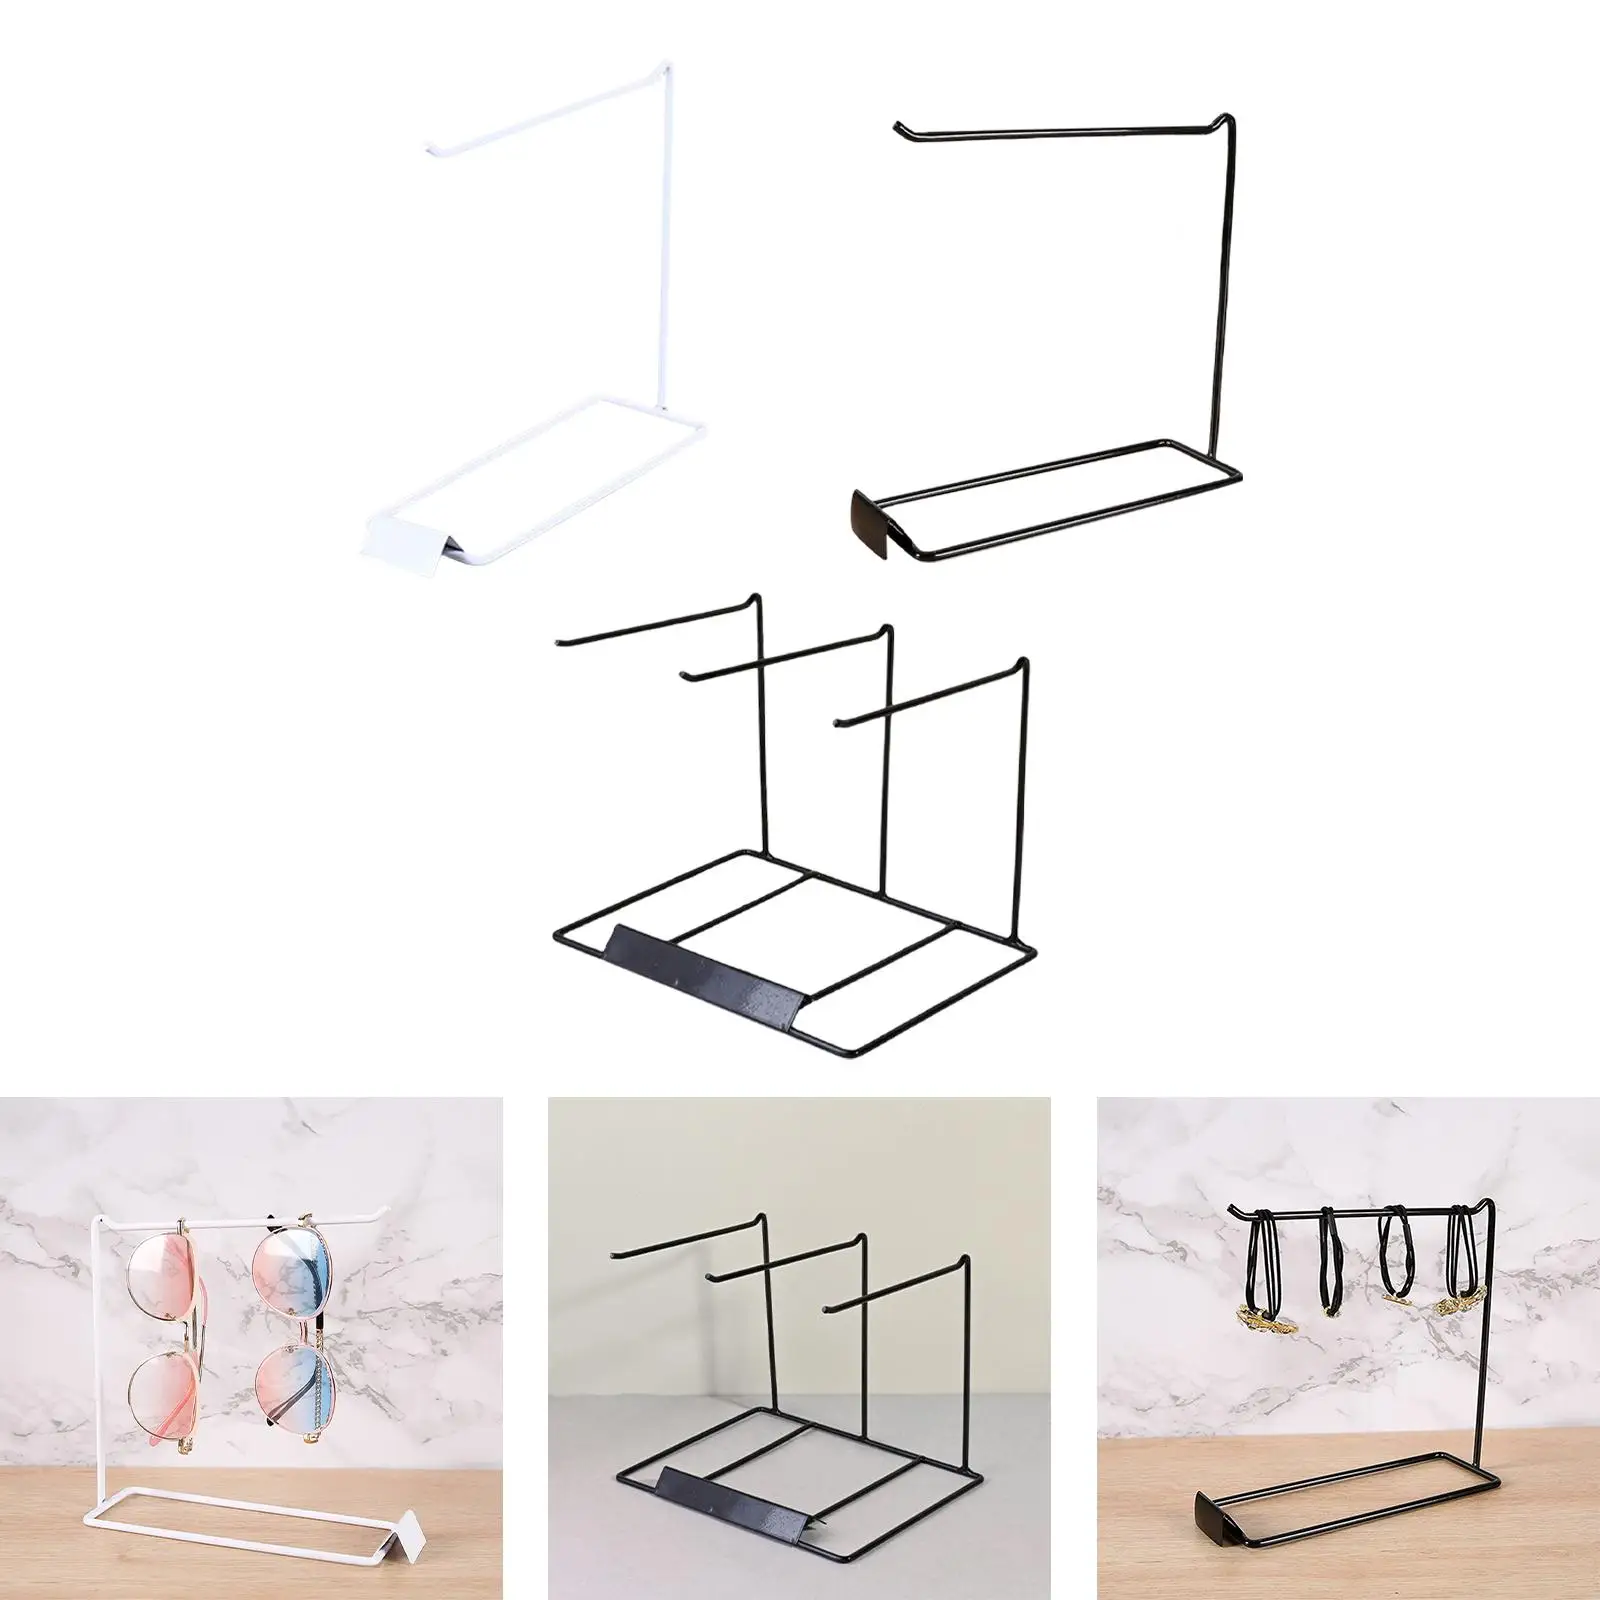 Countertop Jewelry Organizer Stand Free Standing Iron Rack Hanging Display for Hairbands Jewelry Ear Hooks Home Decor Dresser